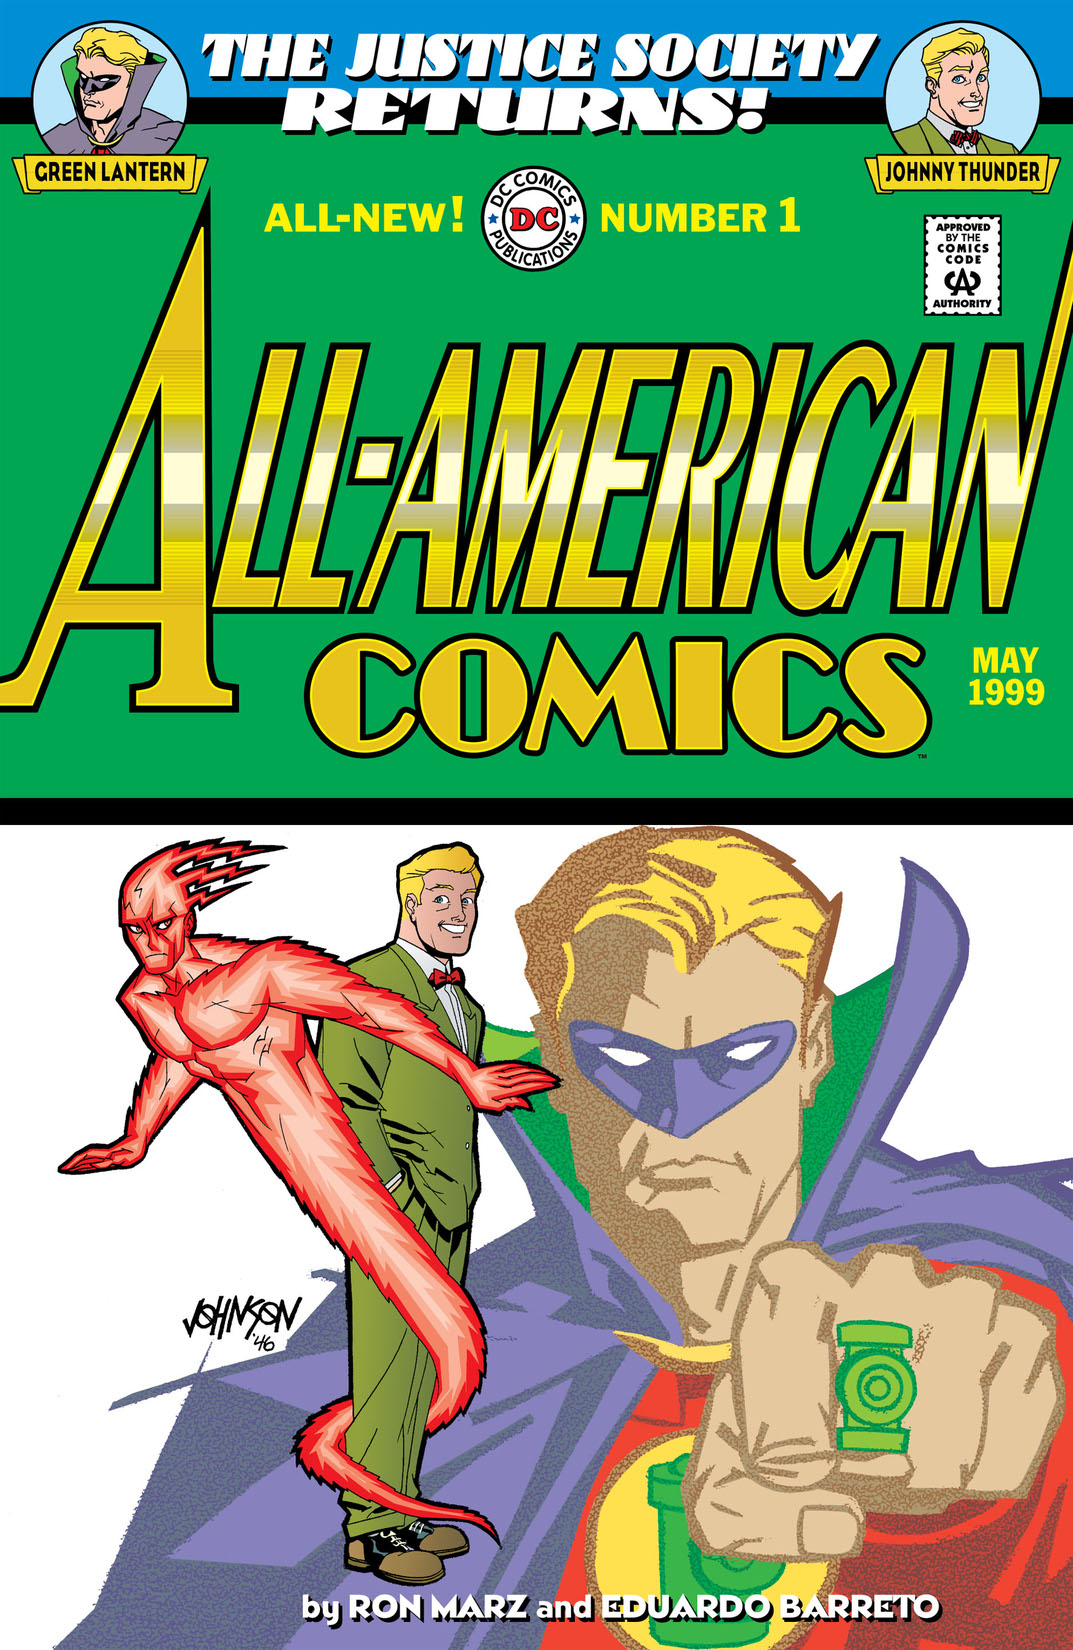 All-American Comics #1 preview images